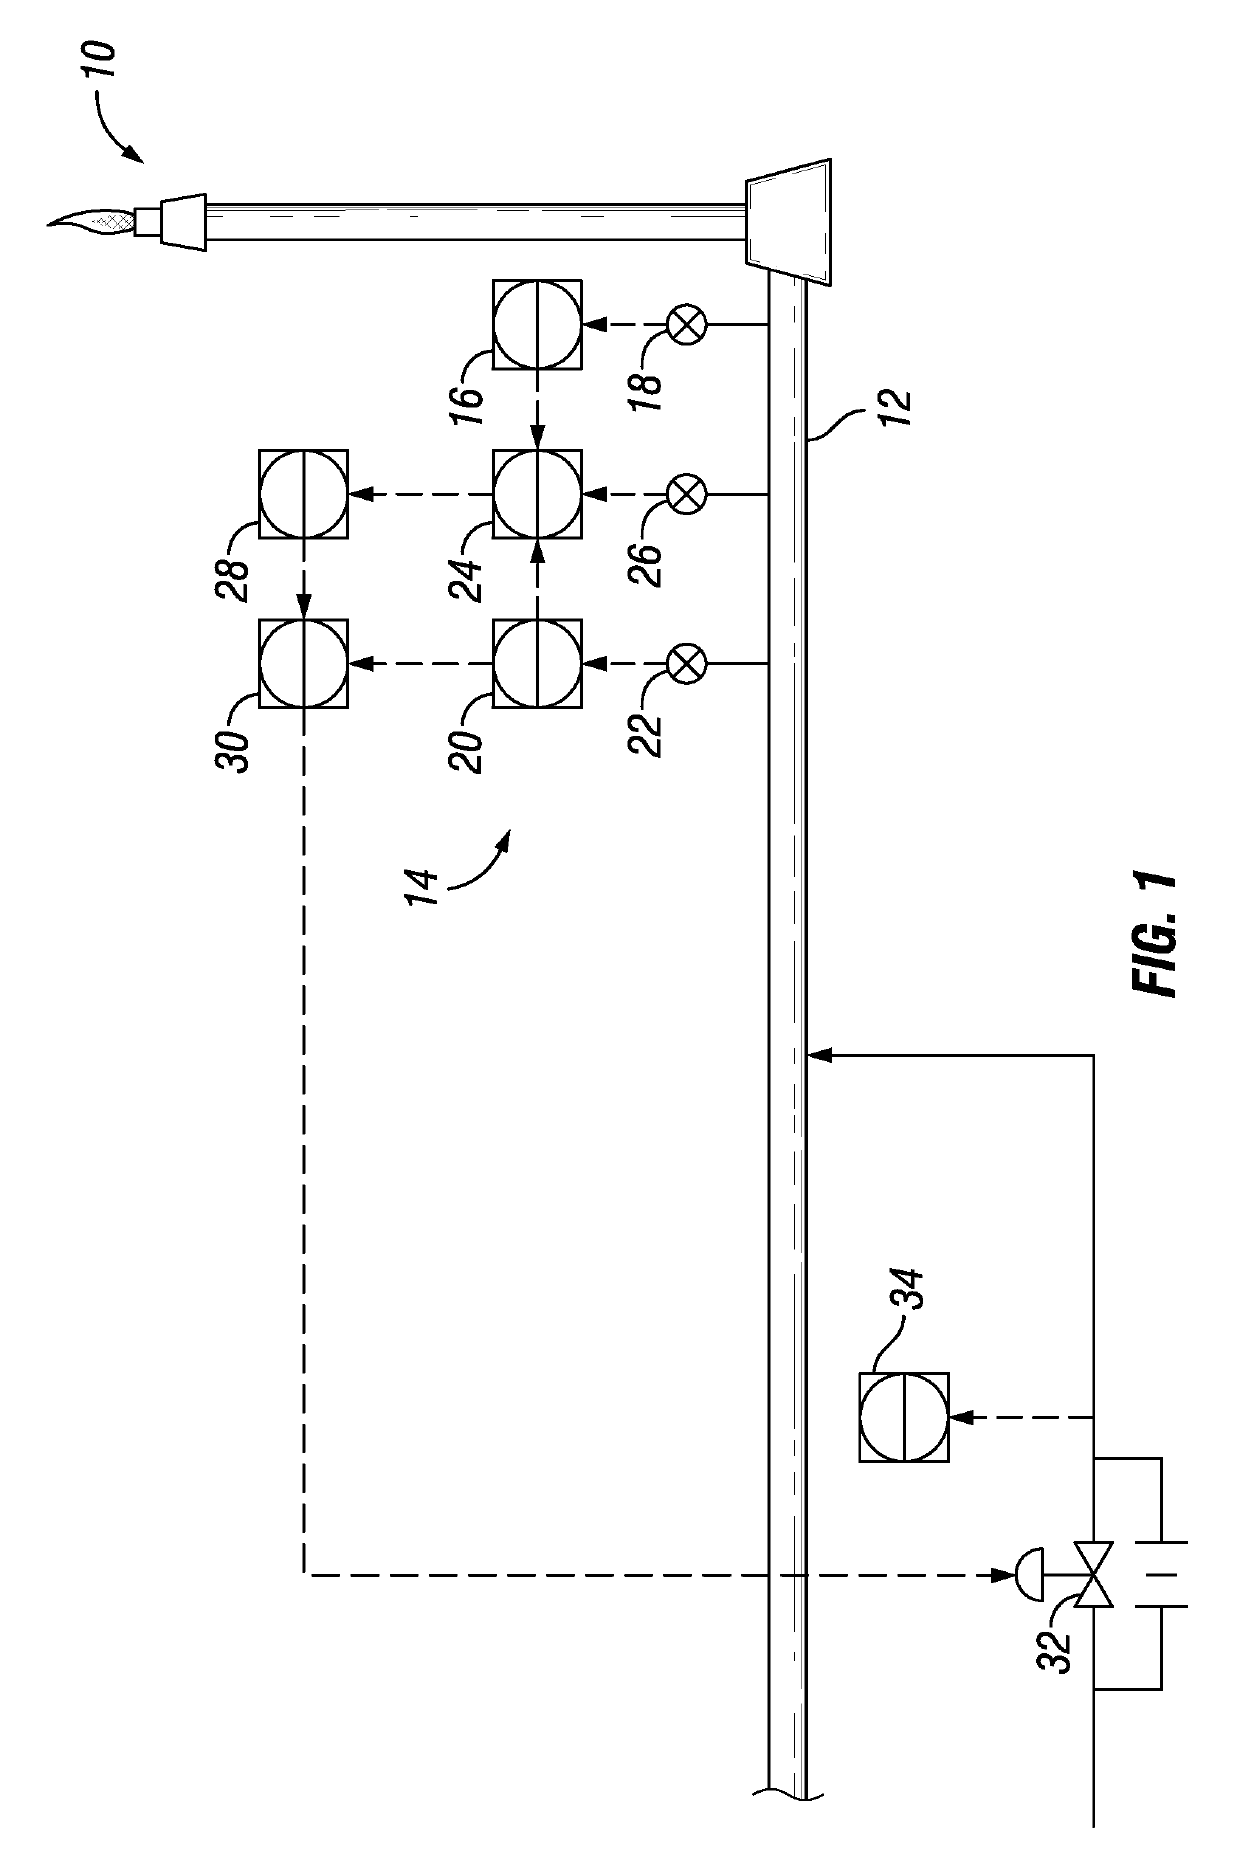 Systems and methods for monitoring and optimizing flare purge gas with a wireless rotameter